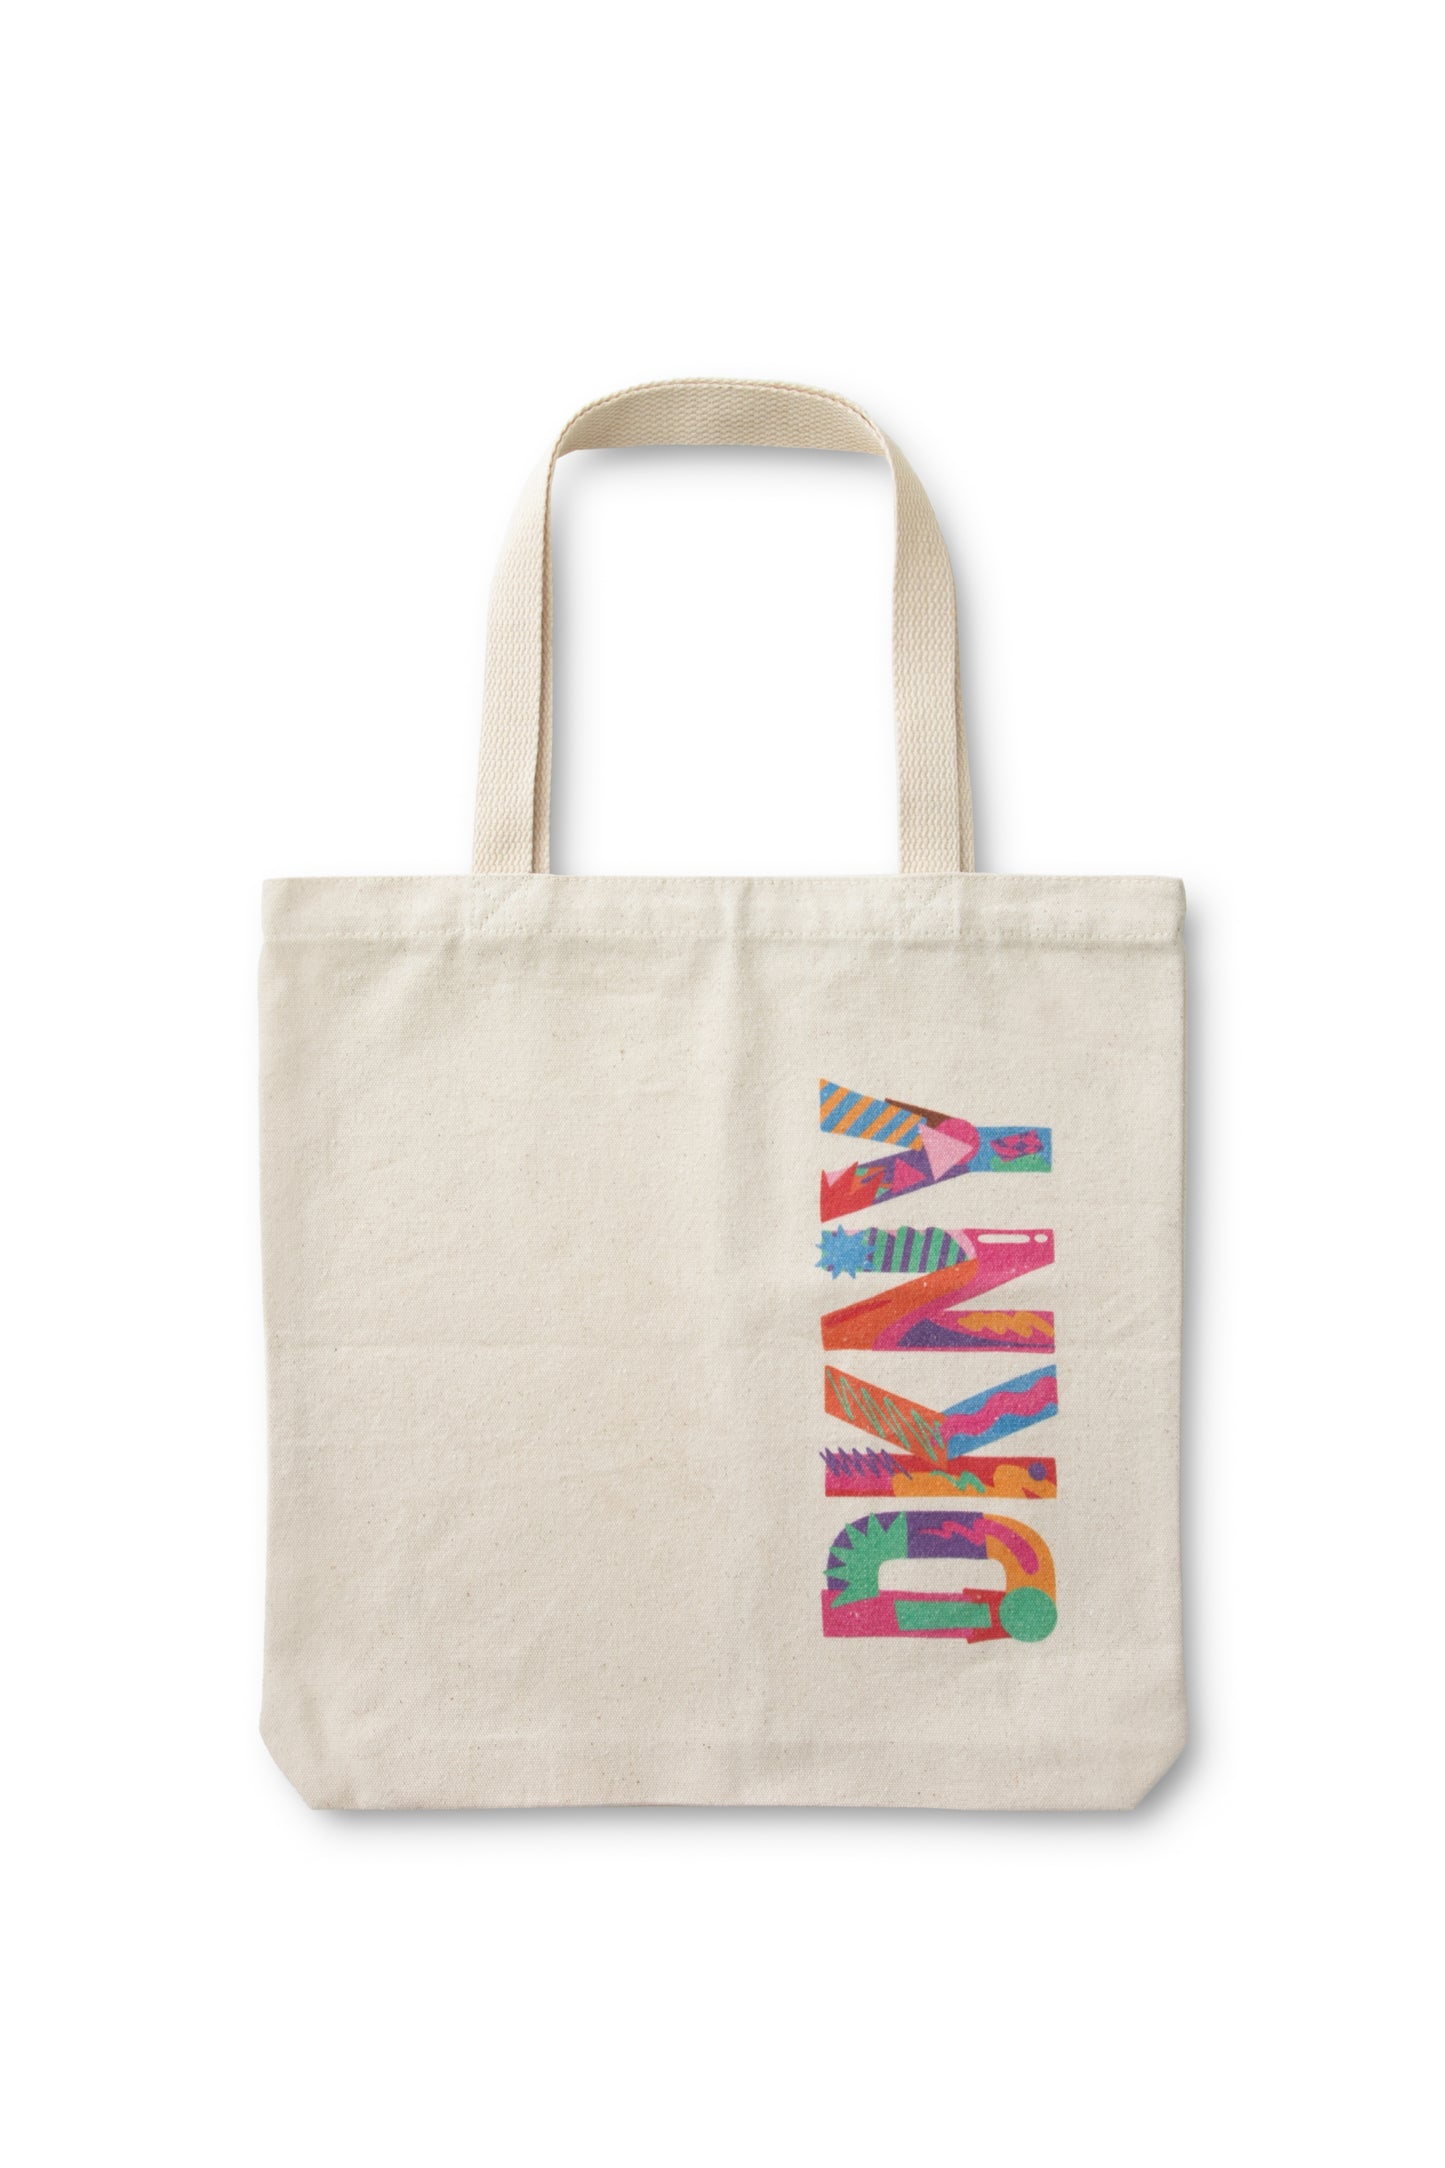 DKNY Pride Tote - Free Gift with Purchase